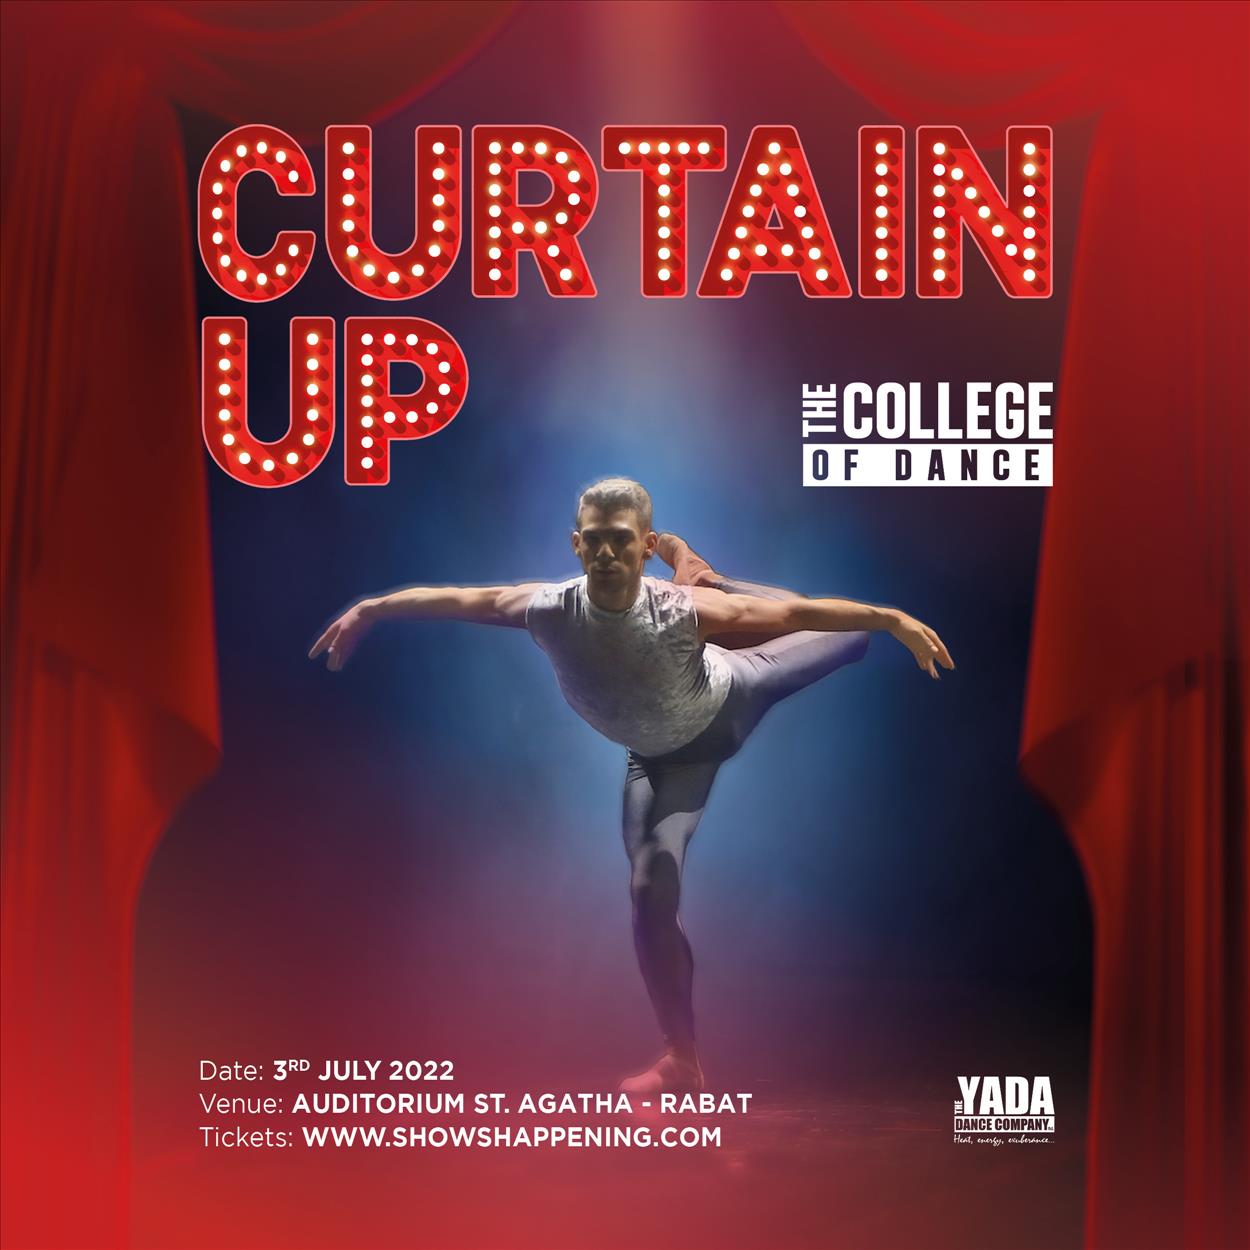 Curtain Up poster